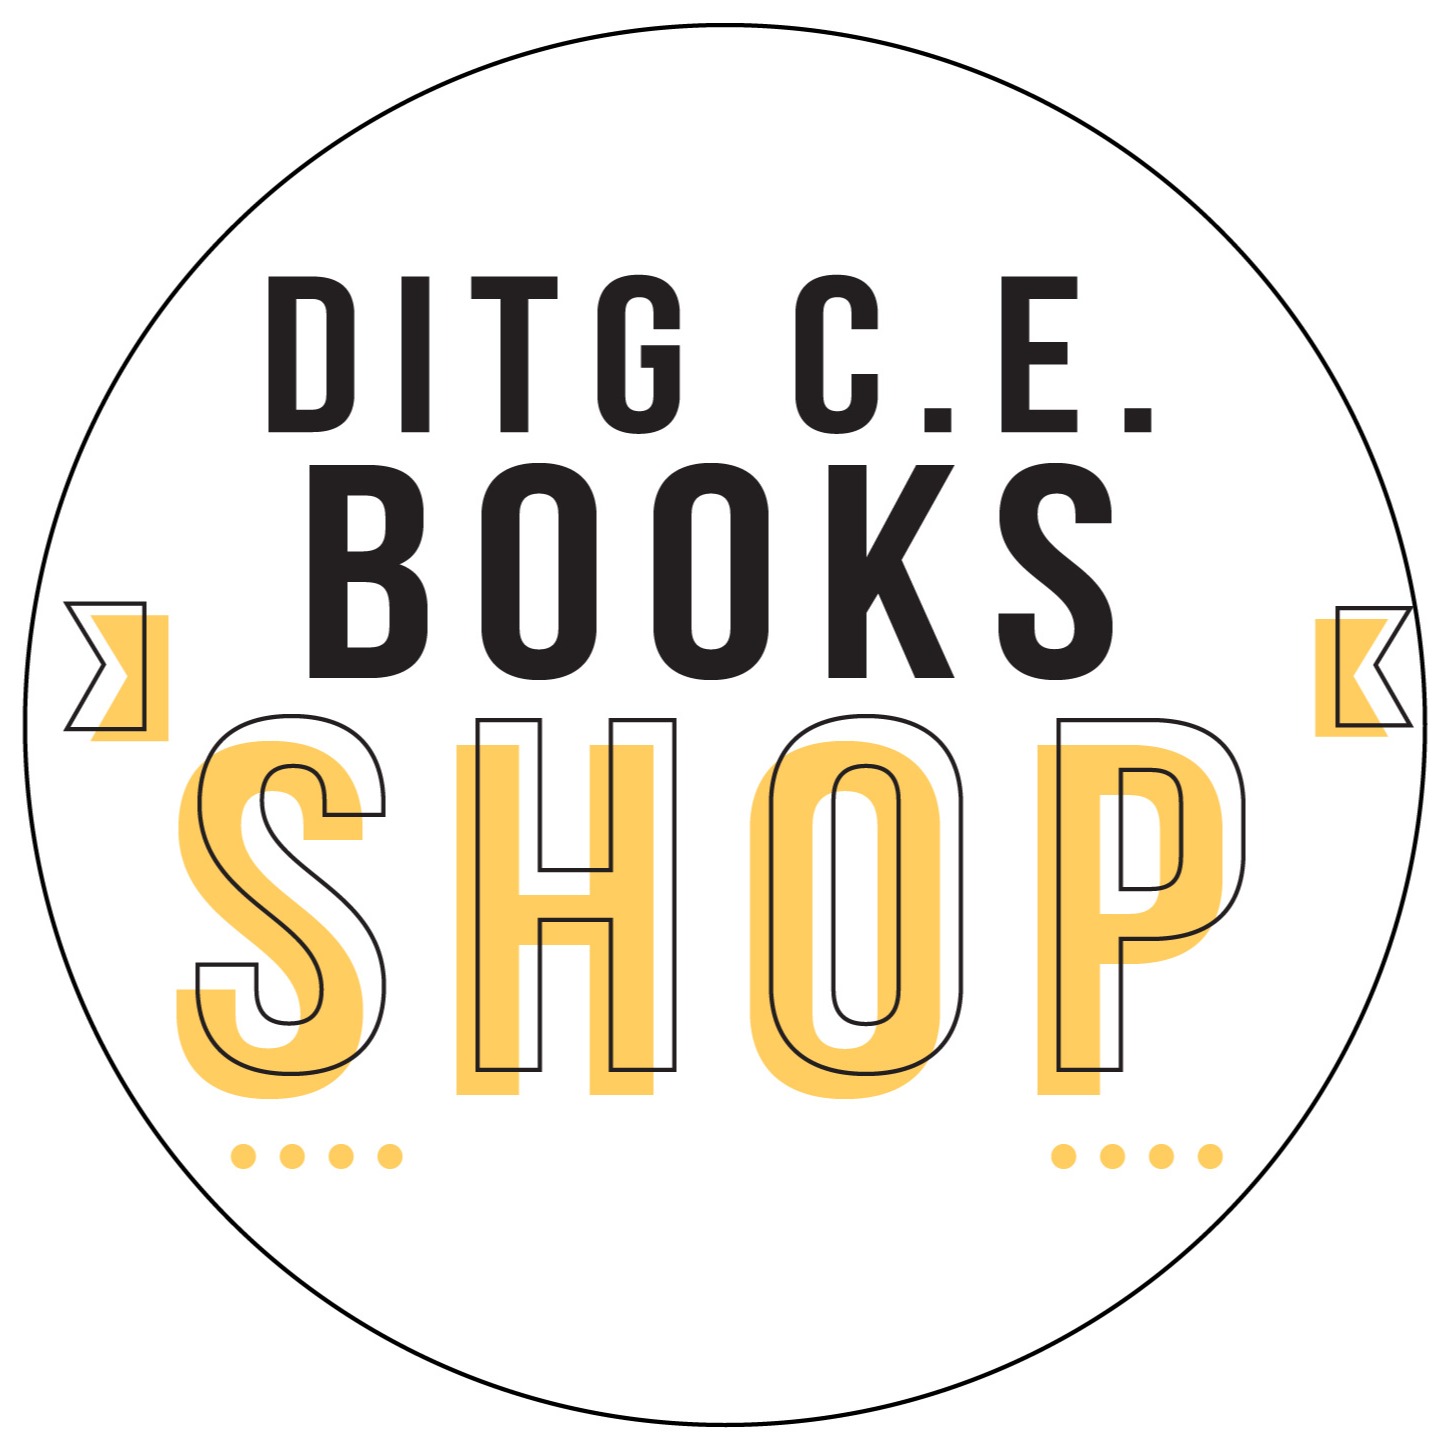 Shop online with DITG Books now! Visit DITG Books on Lazada.